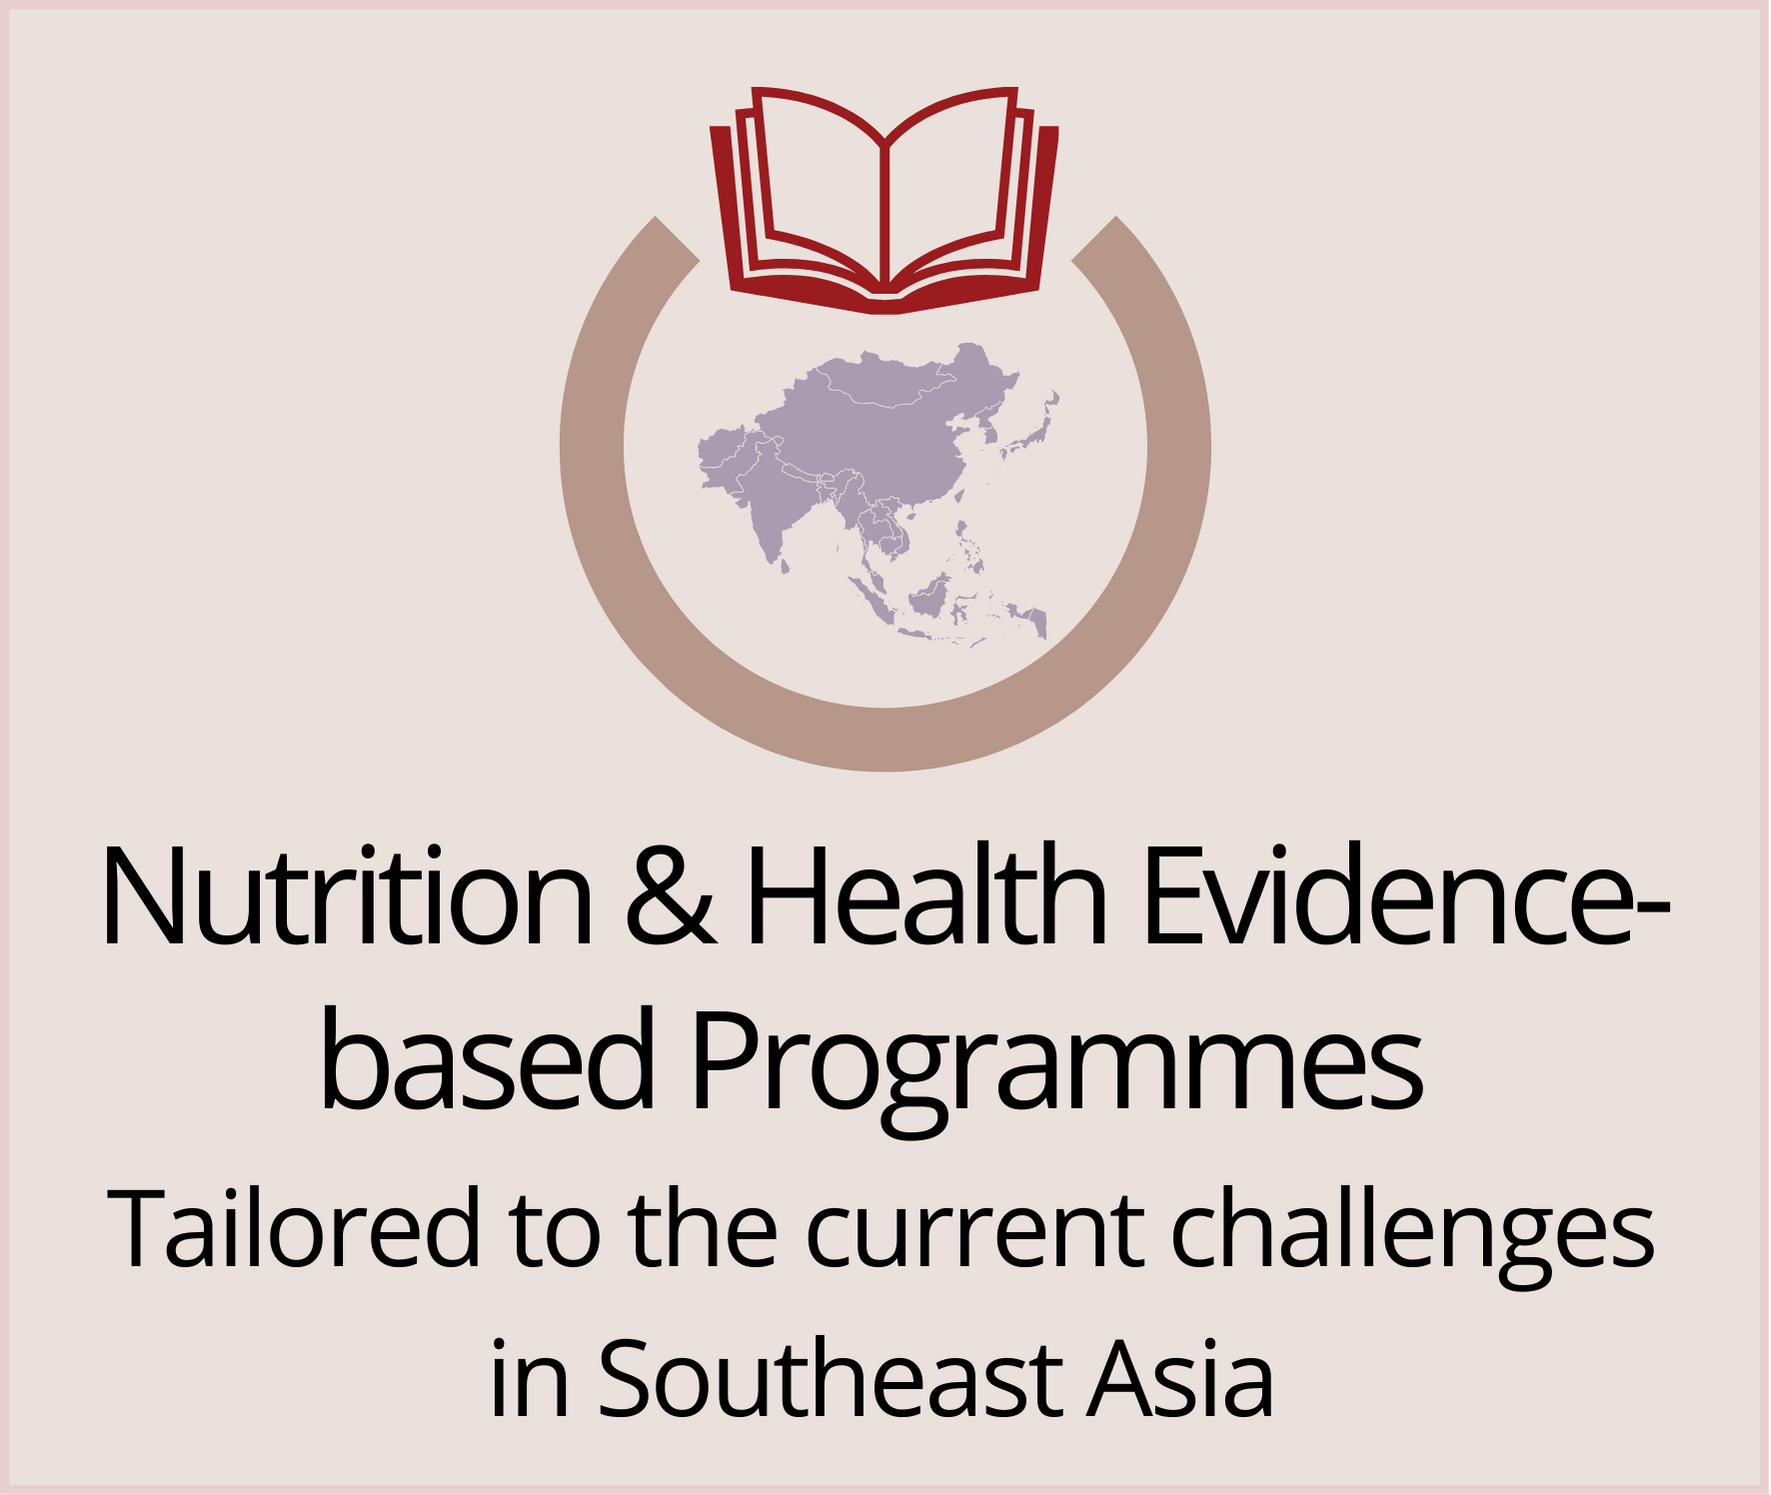 Nutrition and Health Evidence-based Programmes, tailored to the challenges in South East Asia
